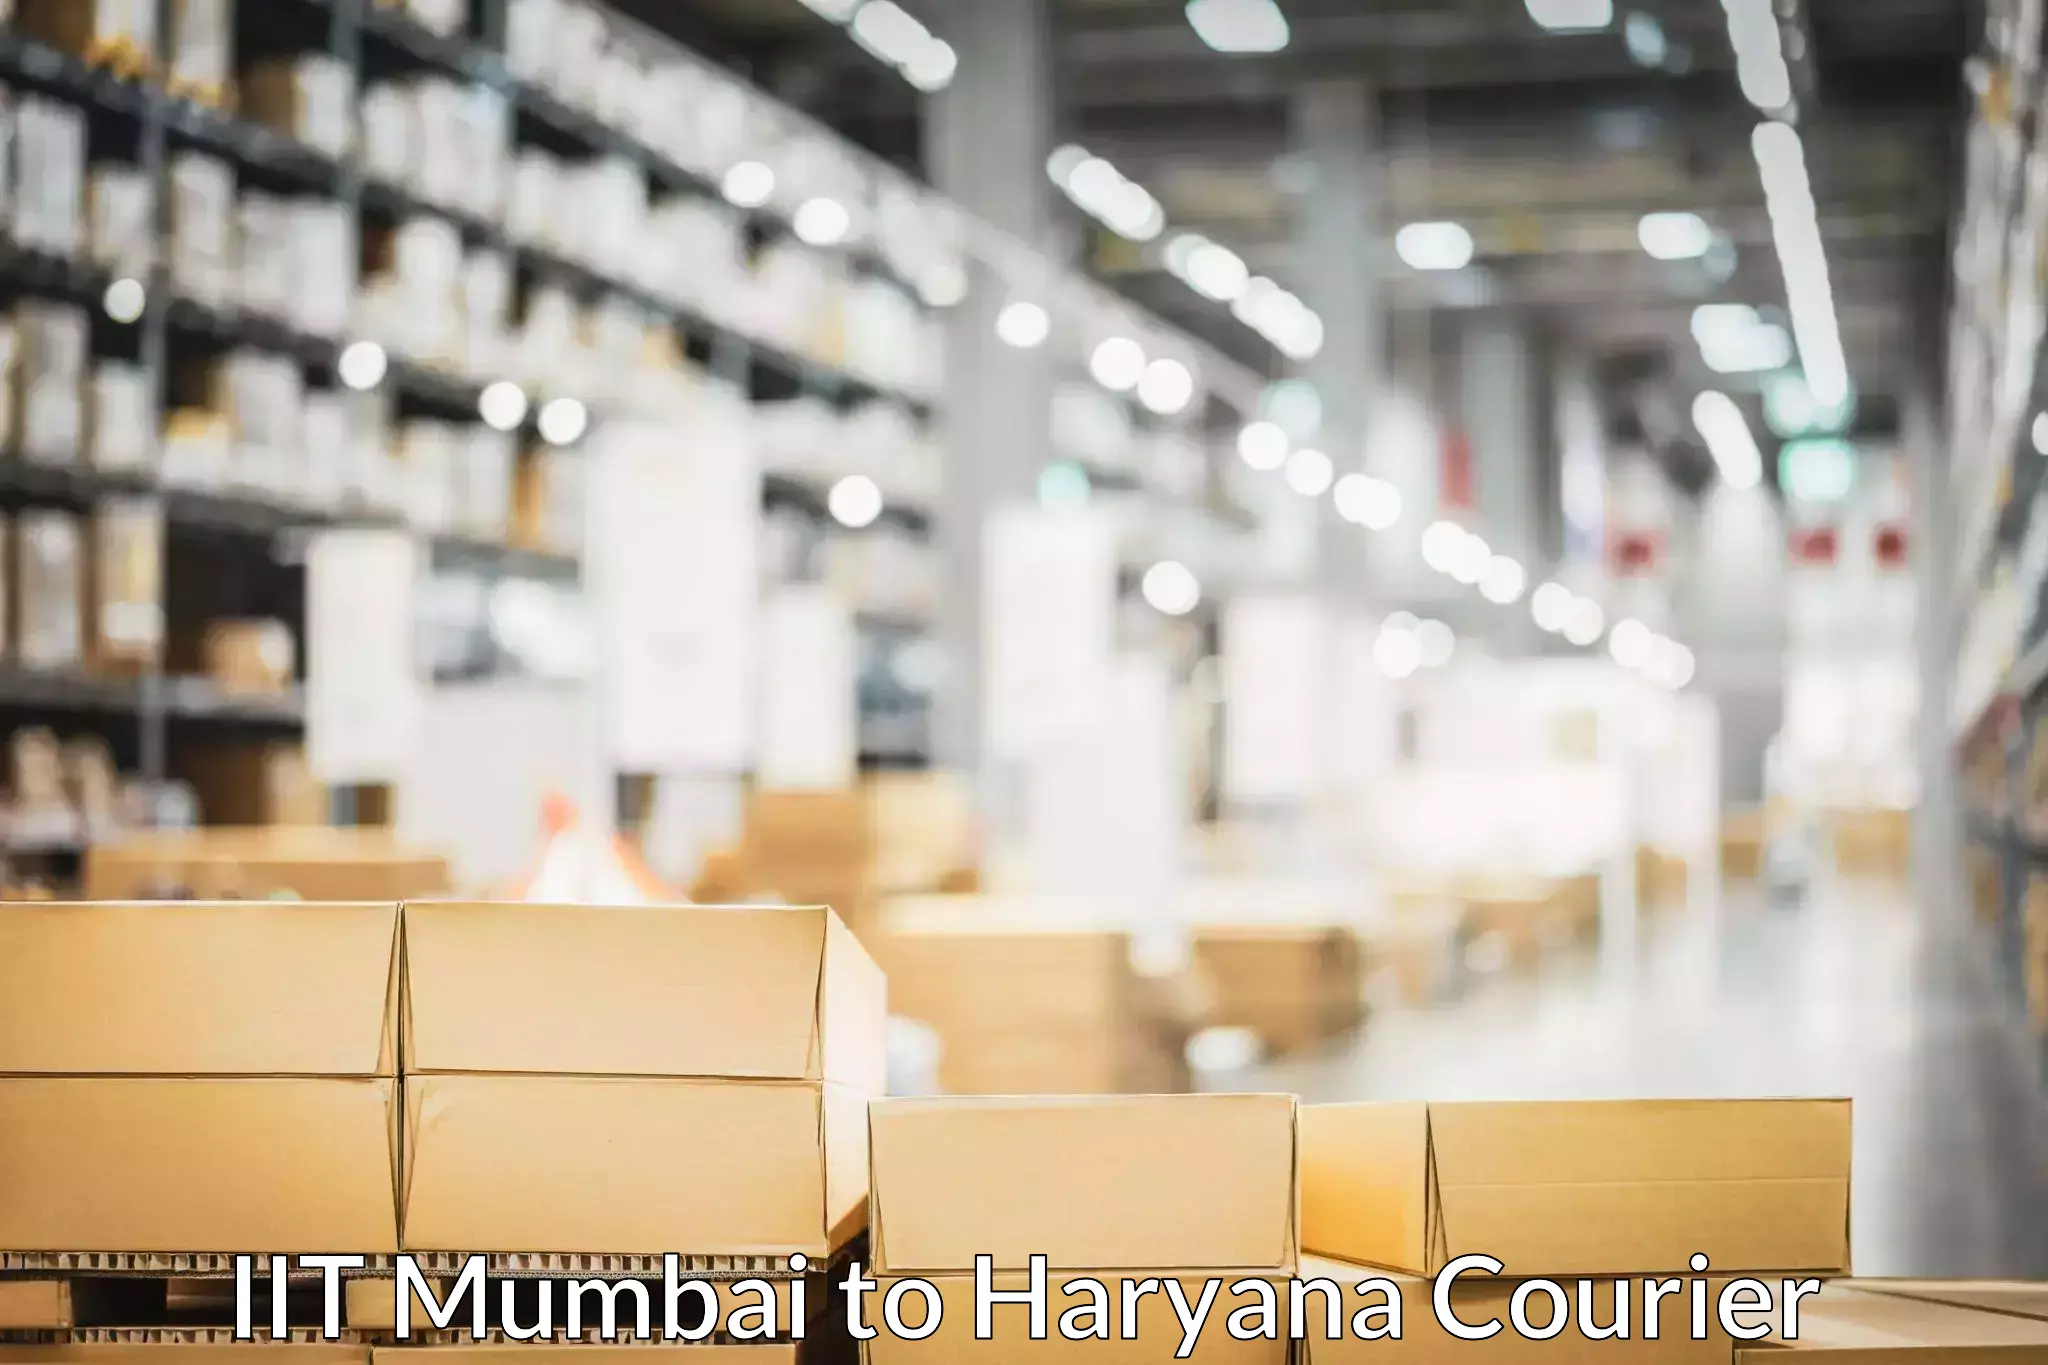 Professional relocation services in IIT Mumbai to NCR Haryana